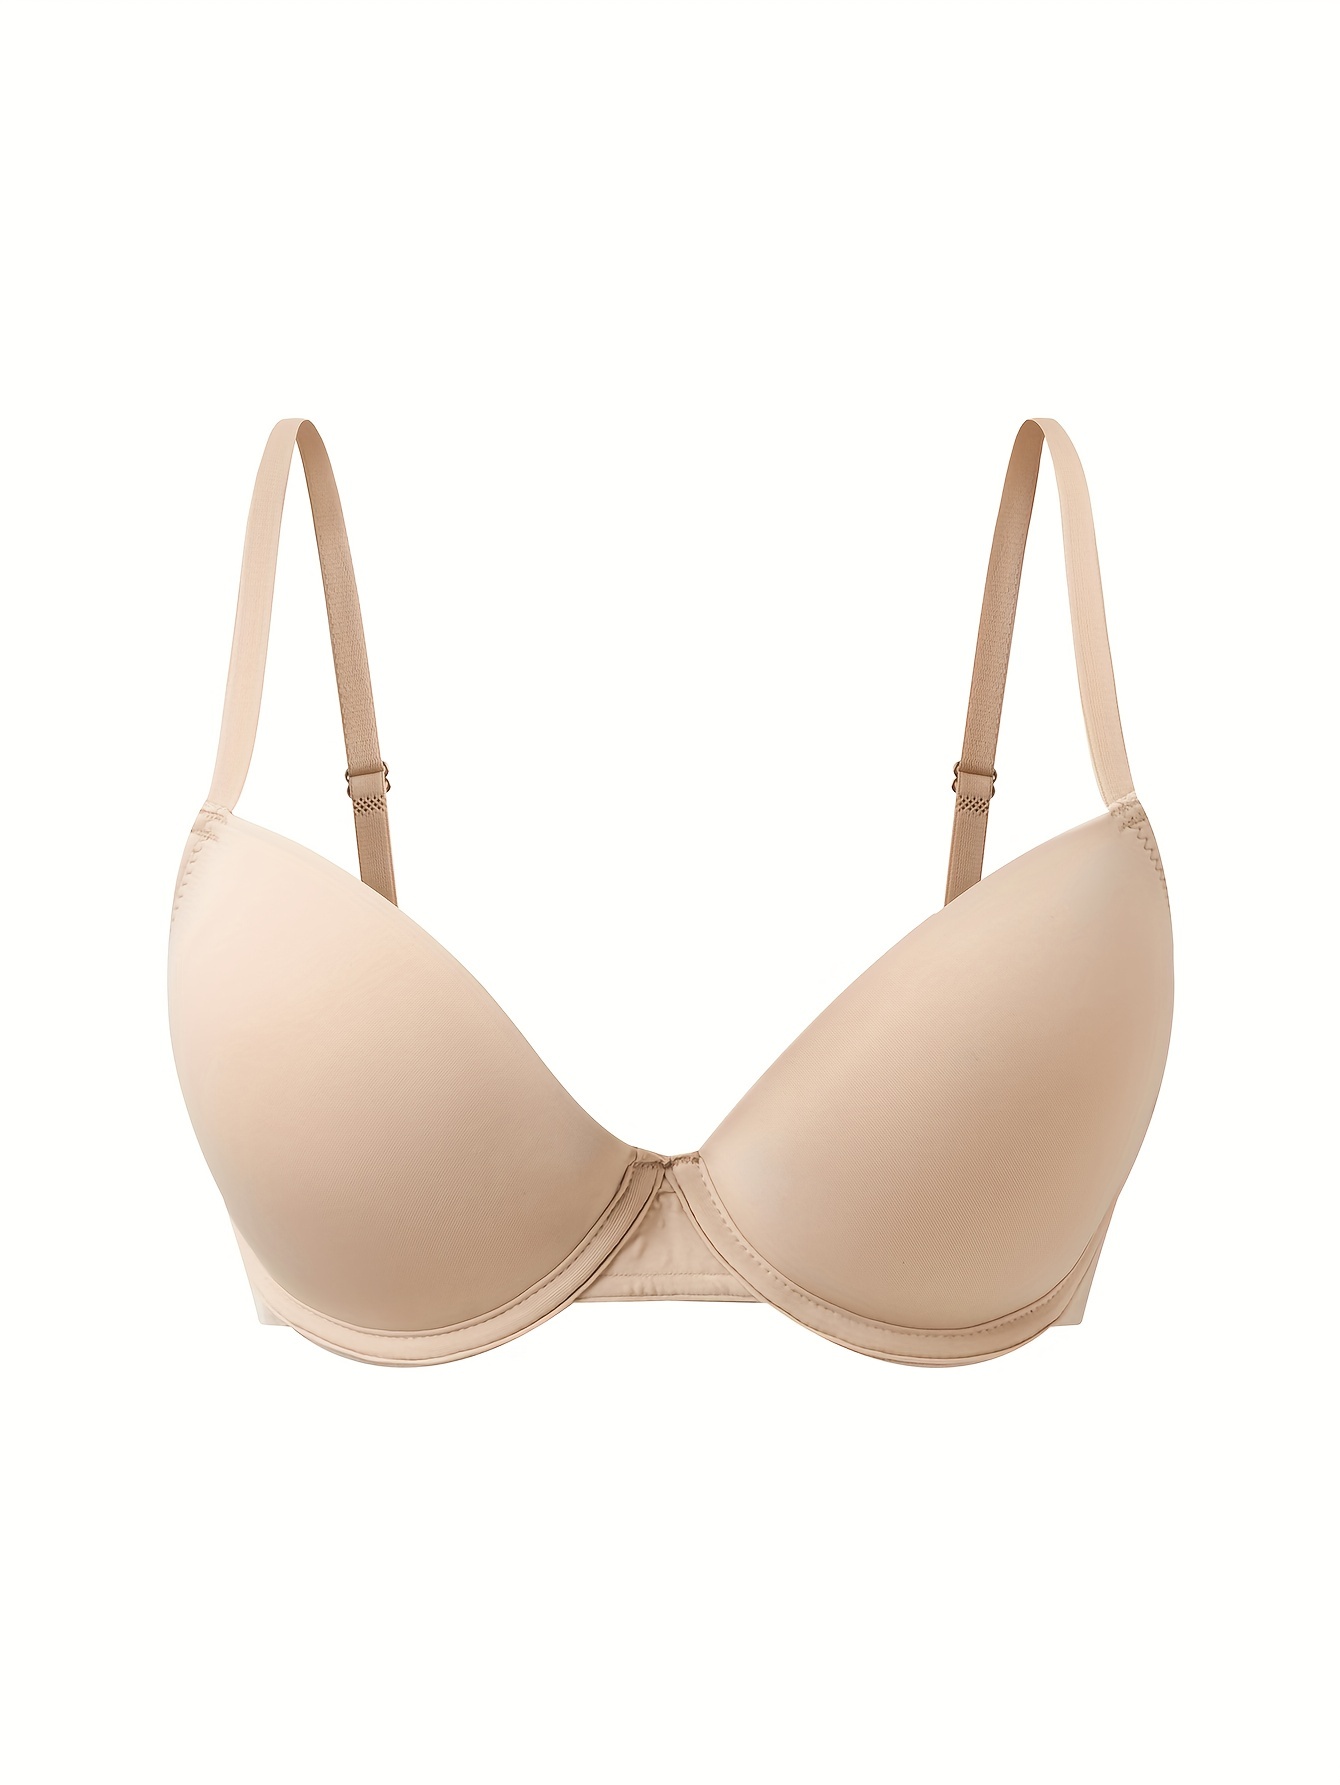 T-Shirt Bras 2 Pack Nude/white 36C